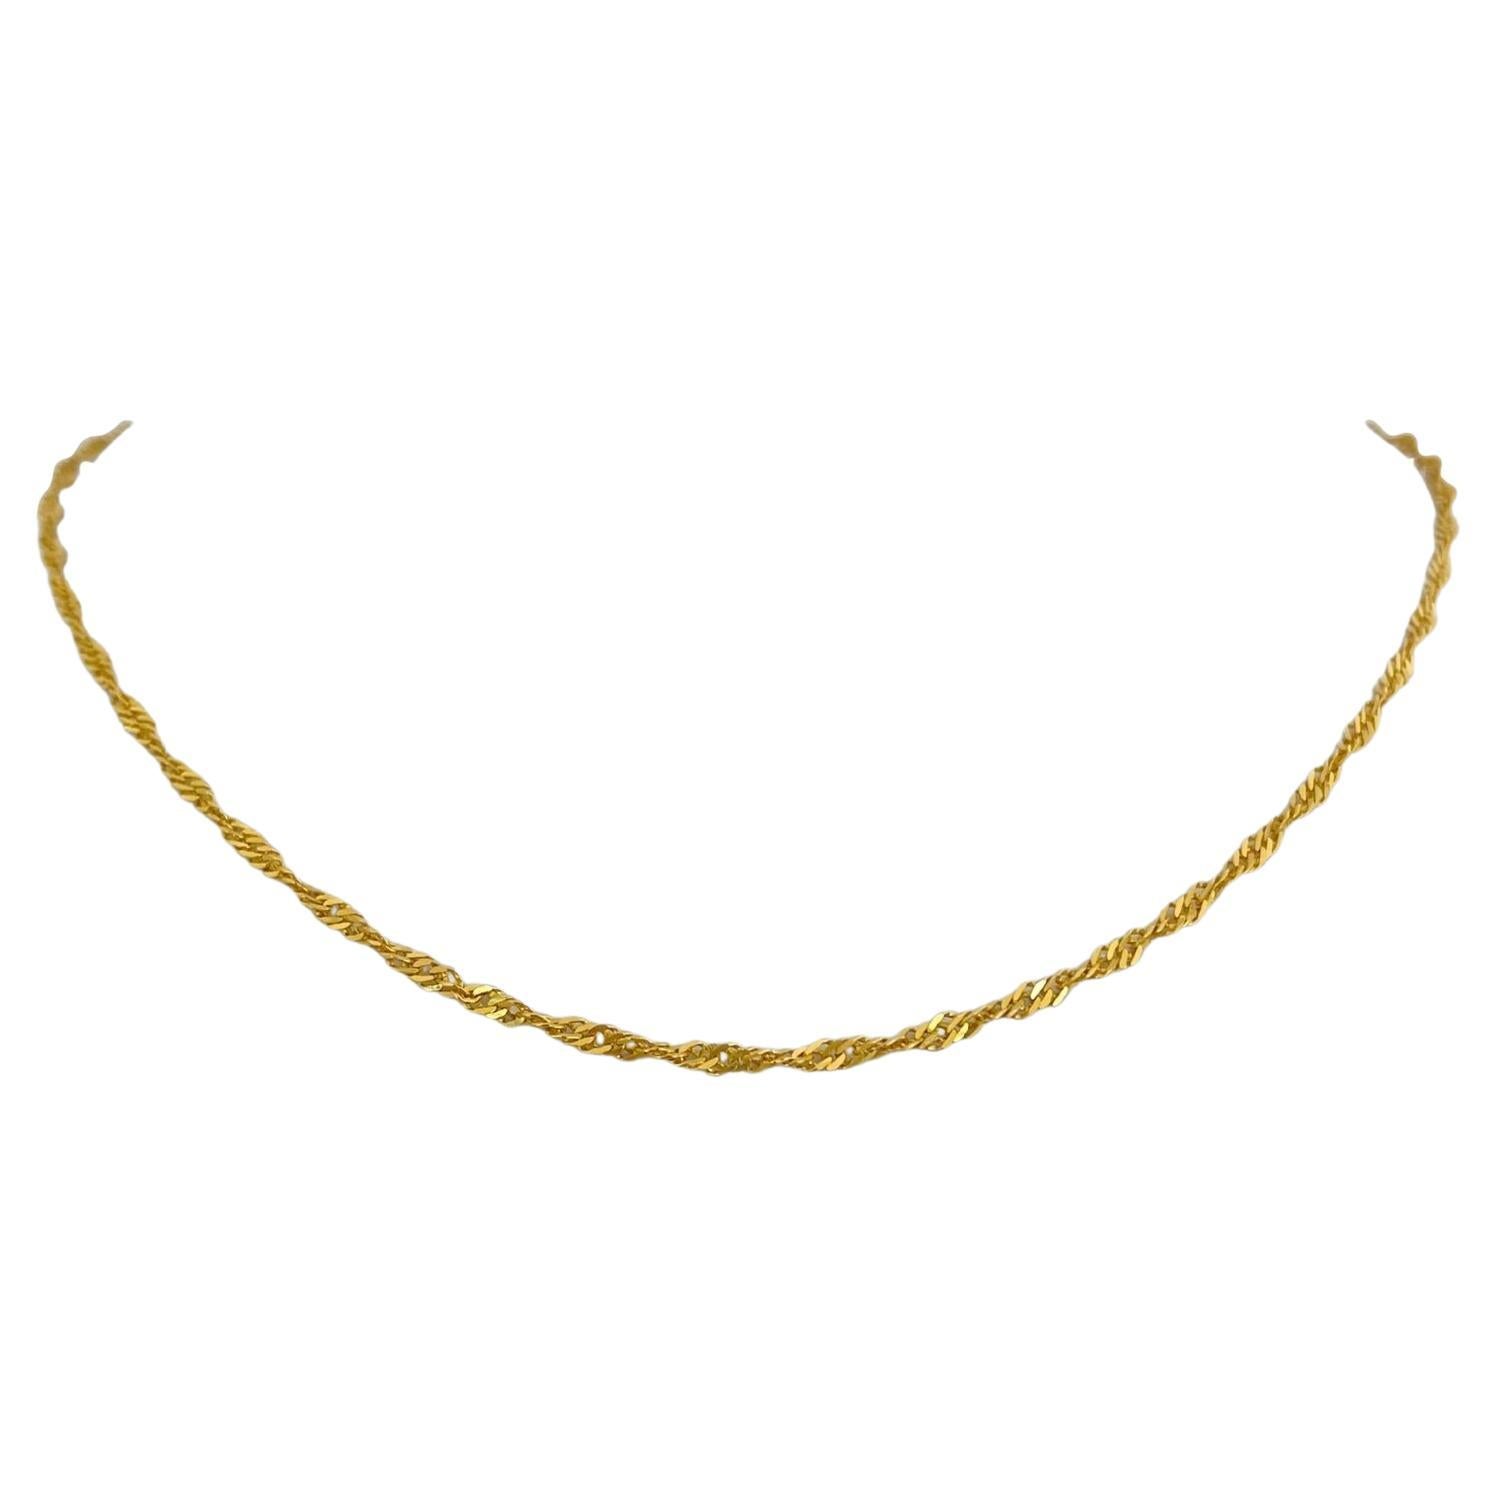 24 Karat Pure Yellow Gold Solid Thin Twisted Curb Link Chain Necklace 